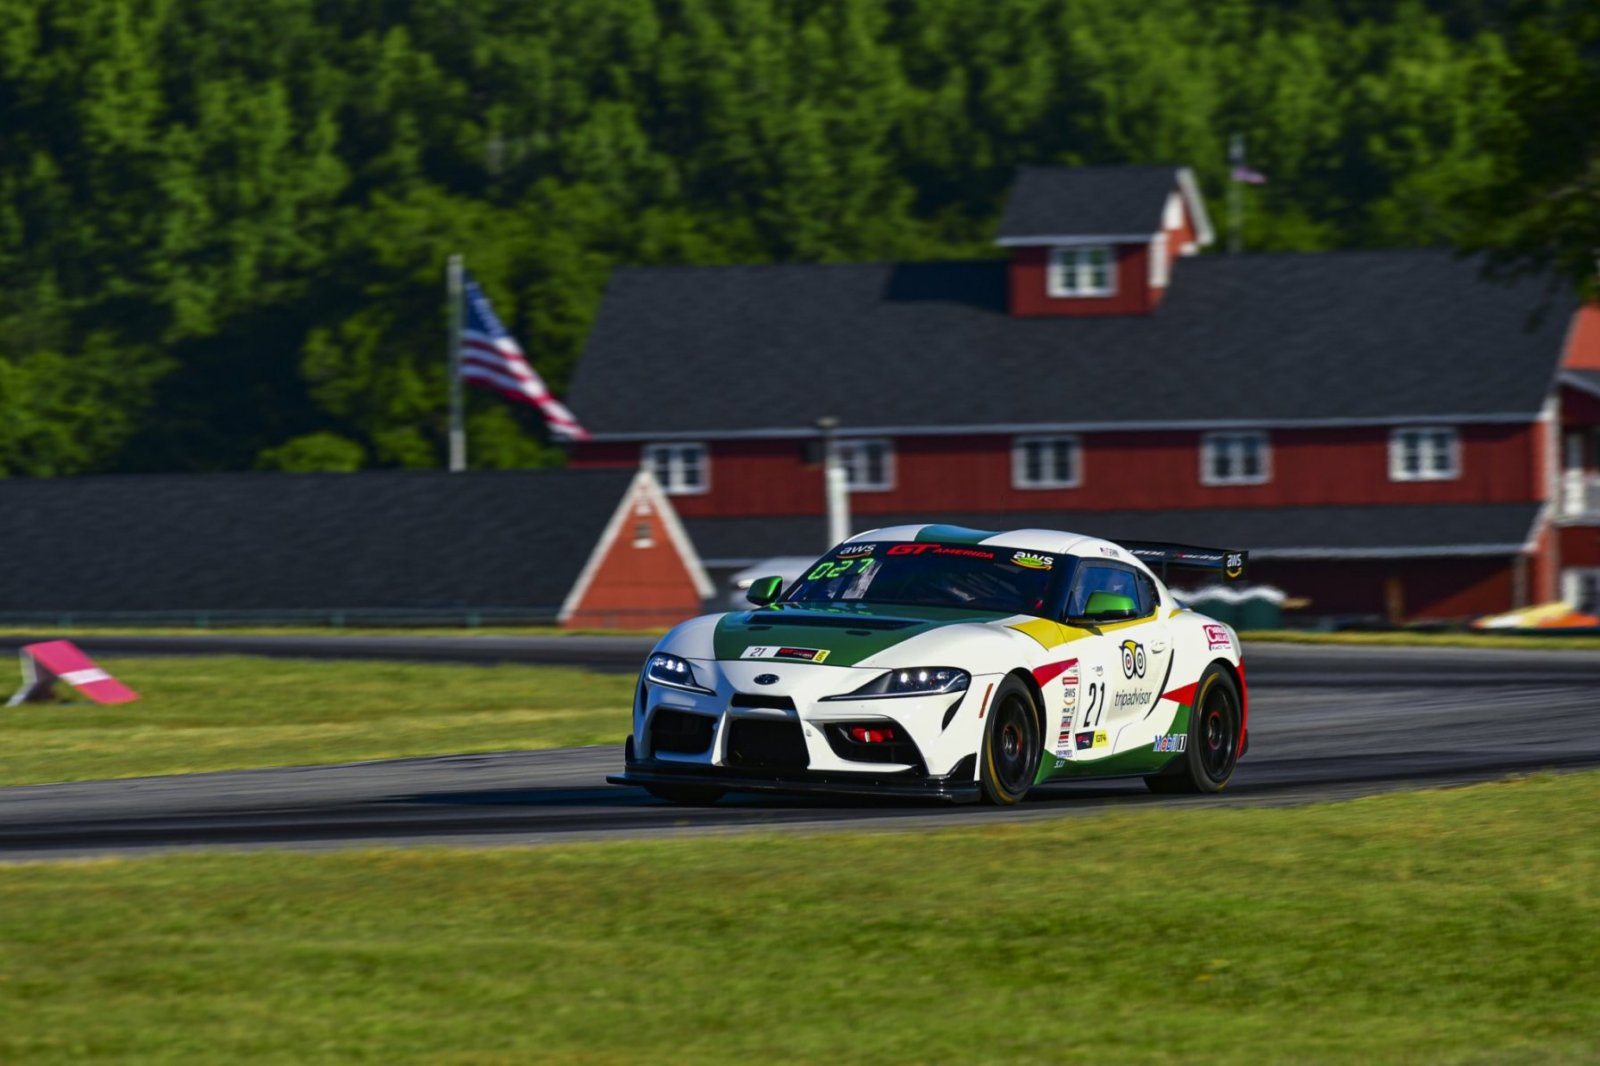 McAleer Charges Ahead in Silver, Davis Tops Pro-Am, Borcheller Sits Atop Am in Pirelli GT4 America Practice 1 at VIR